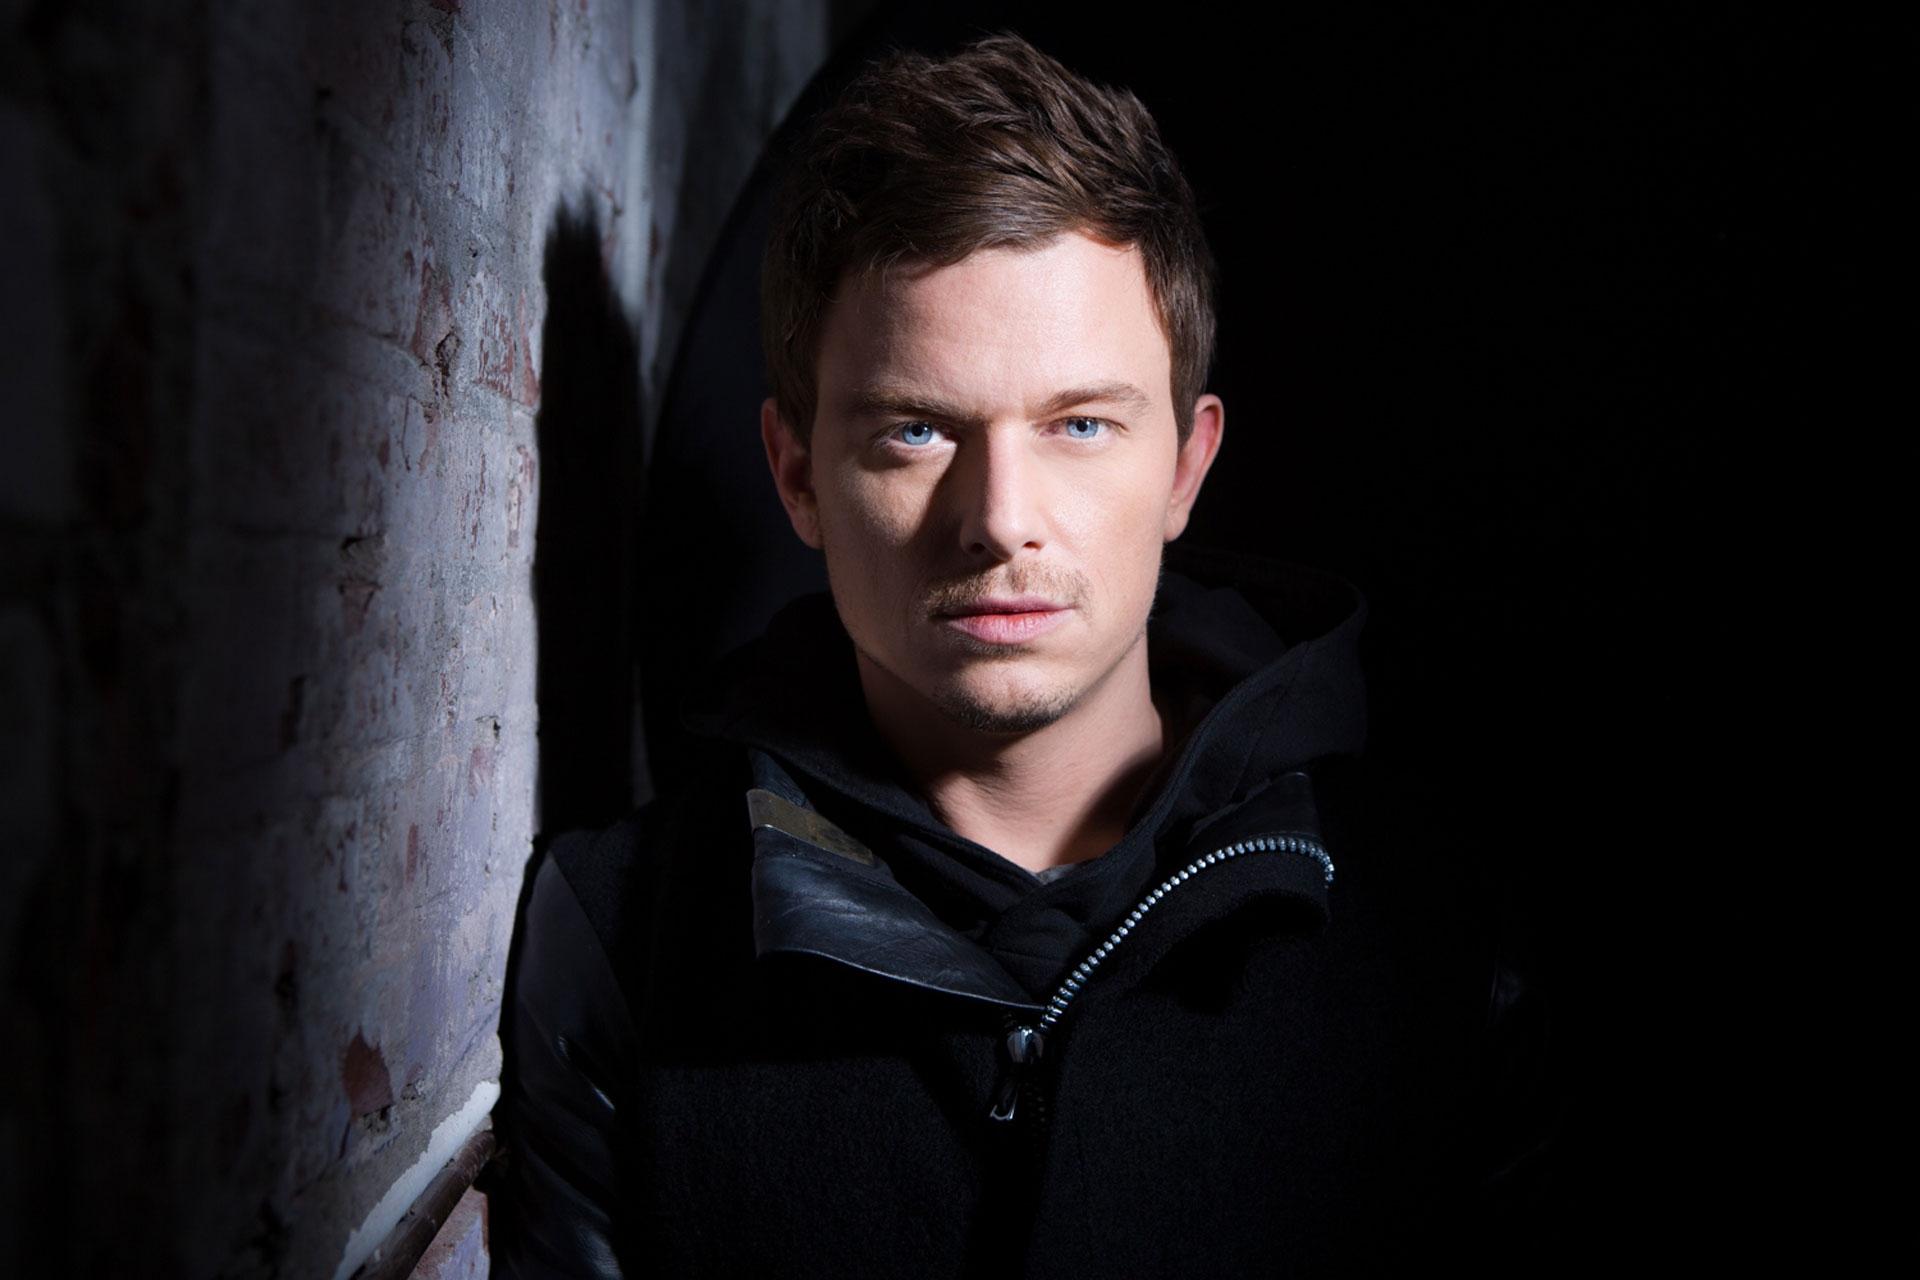 Fedde le Grand Wallpaper Image Photo Picture Background